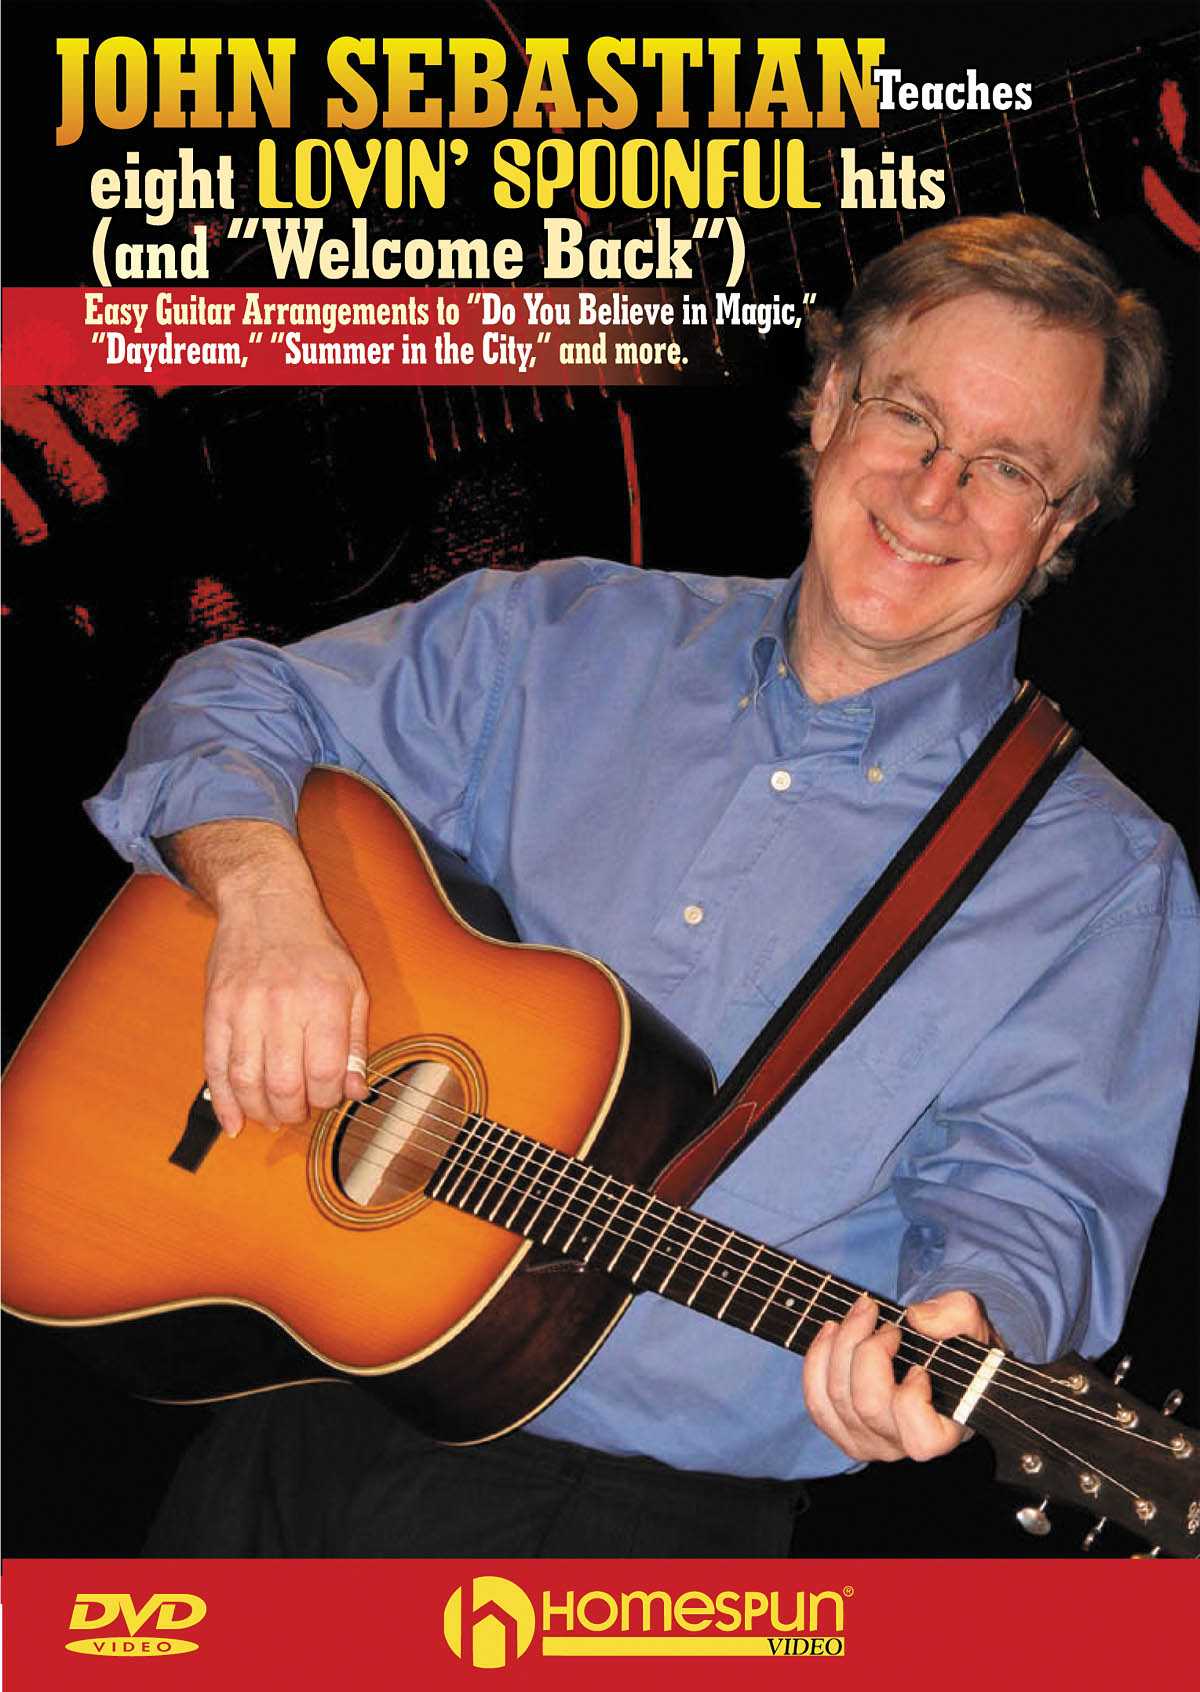 Image 1 of DVD - John Sebastian Teaches Eight Lovin' Spoonful Hits (and "Welcome Back") - SKU# 300-DVD318 : Product Type Media : Elderly Instruments